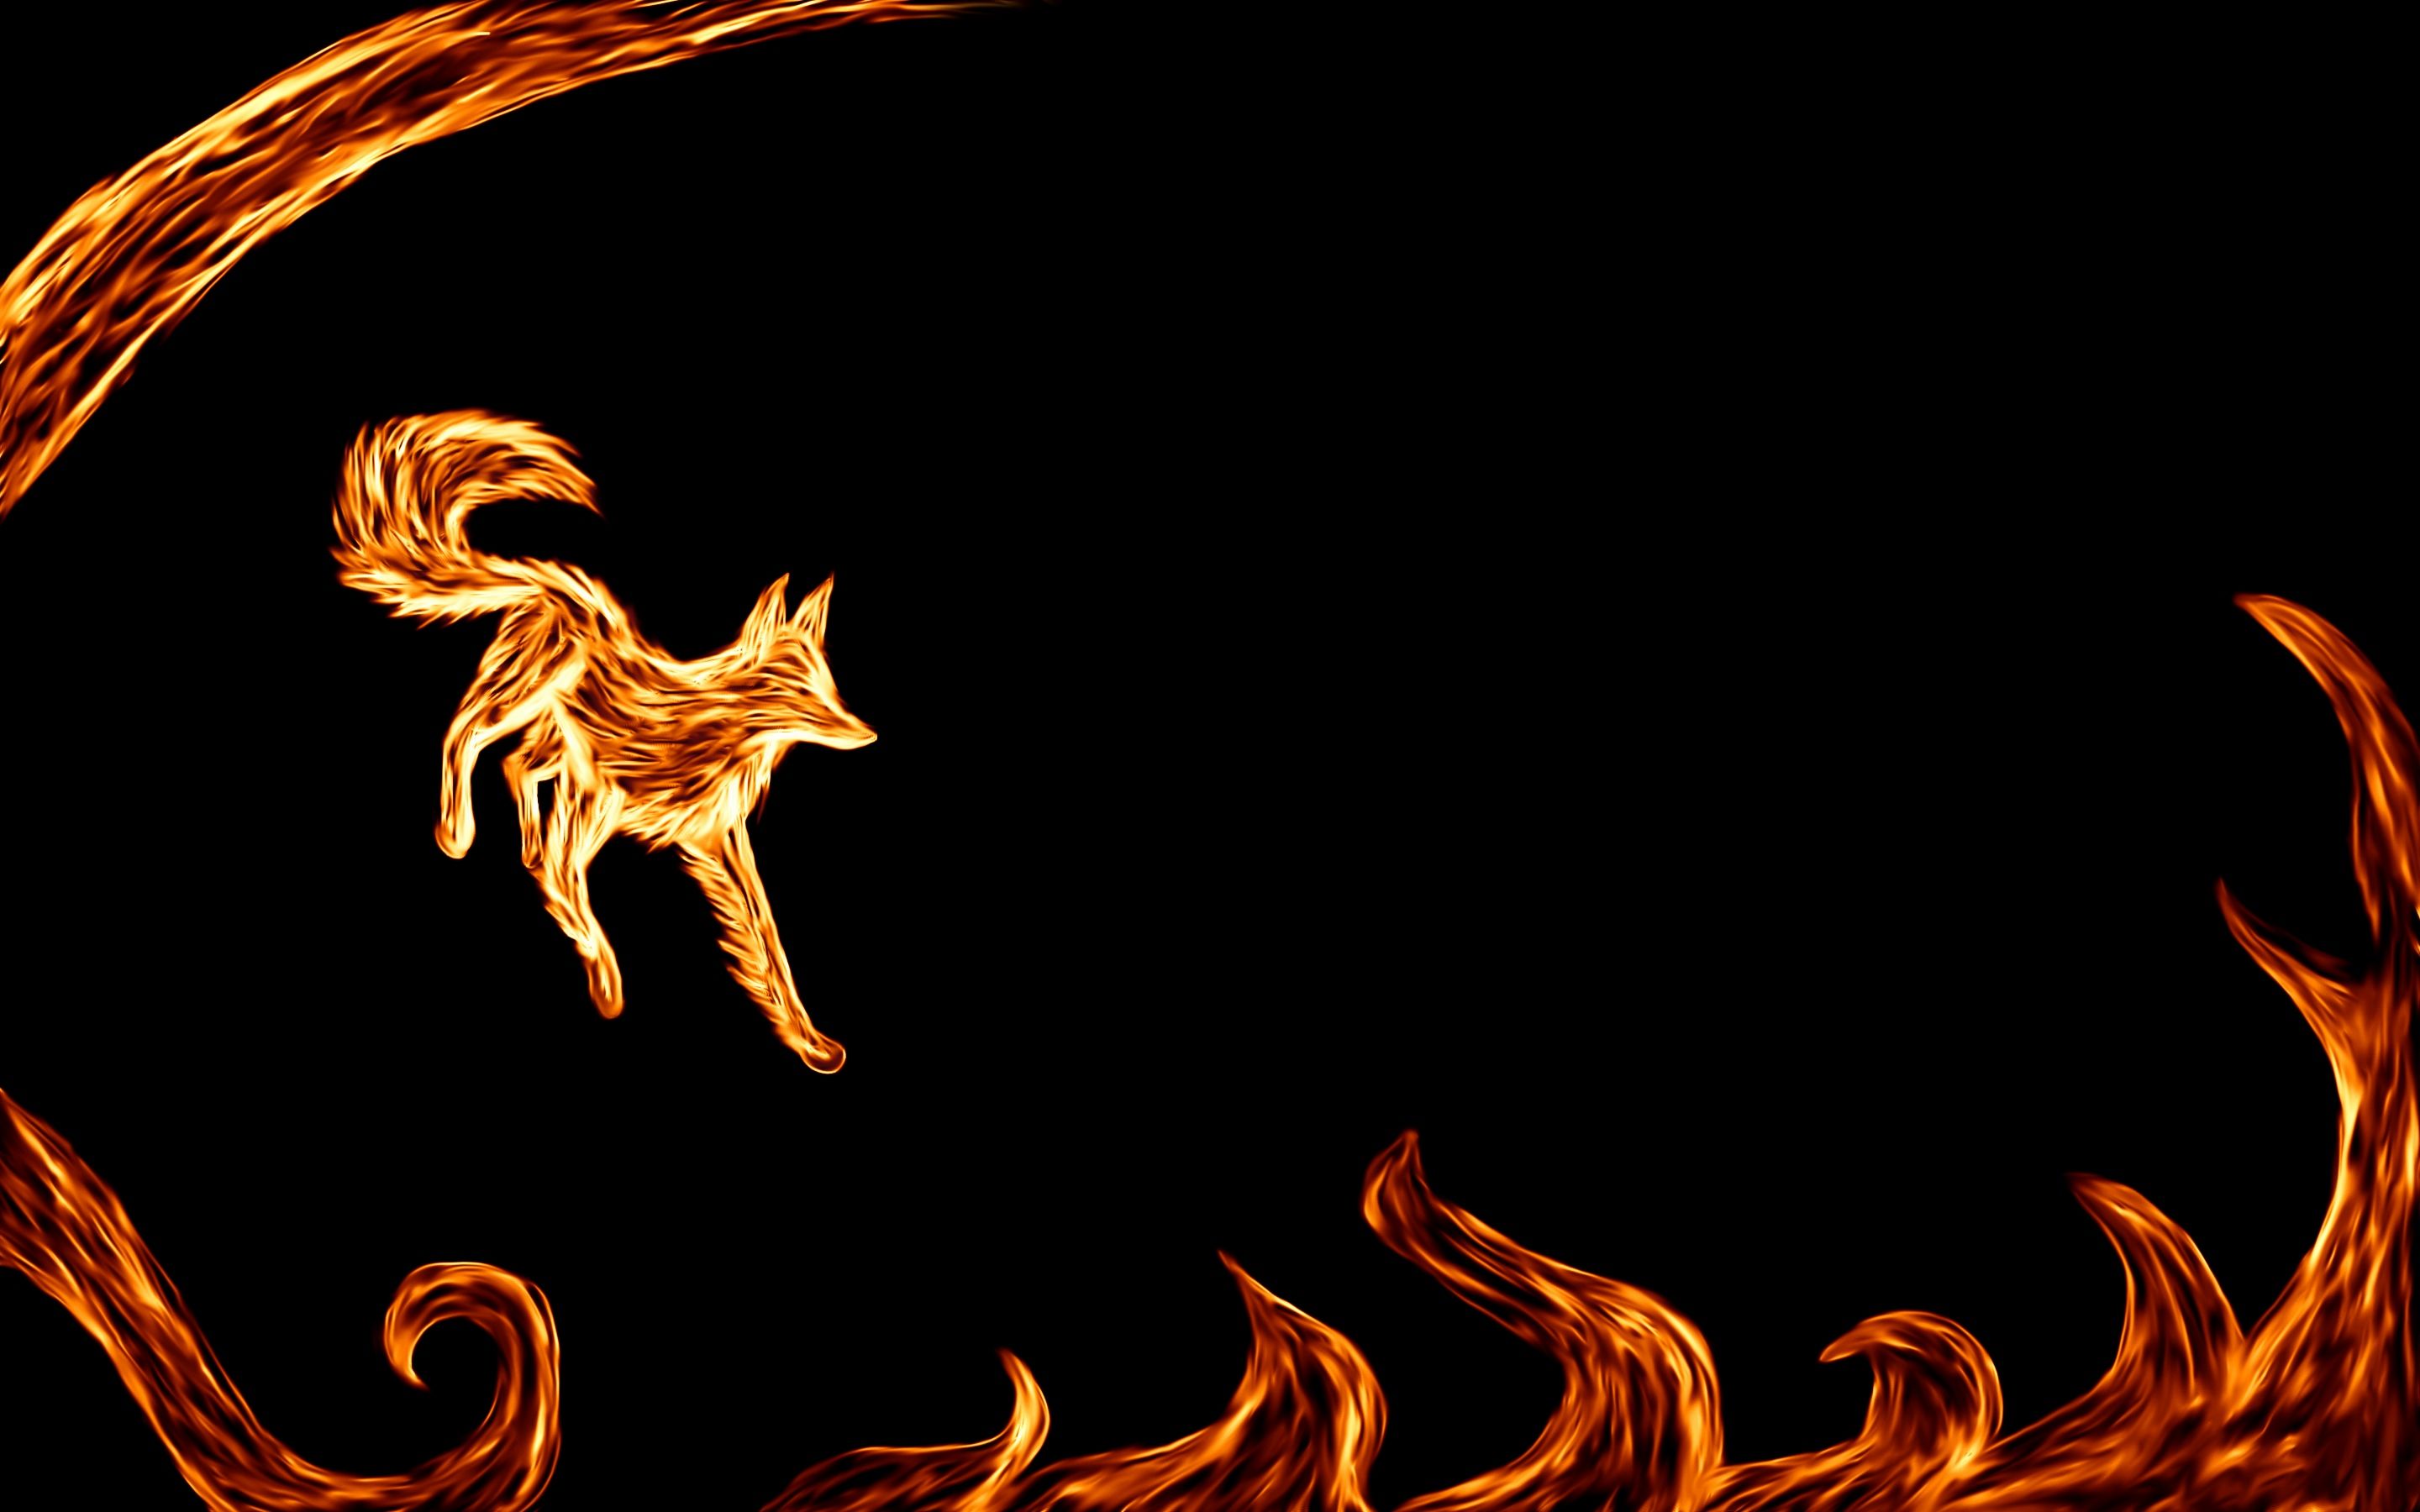 Awesome Fire Wolf Wallpaper Inspiration of The Hudson